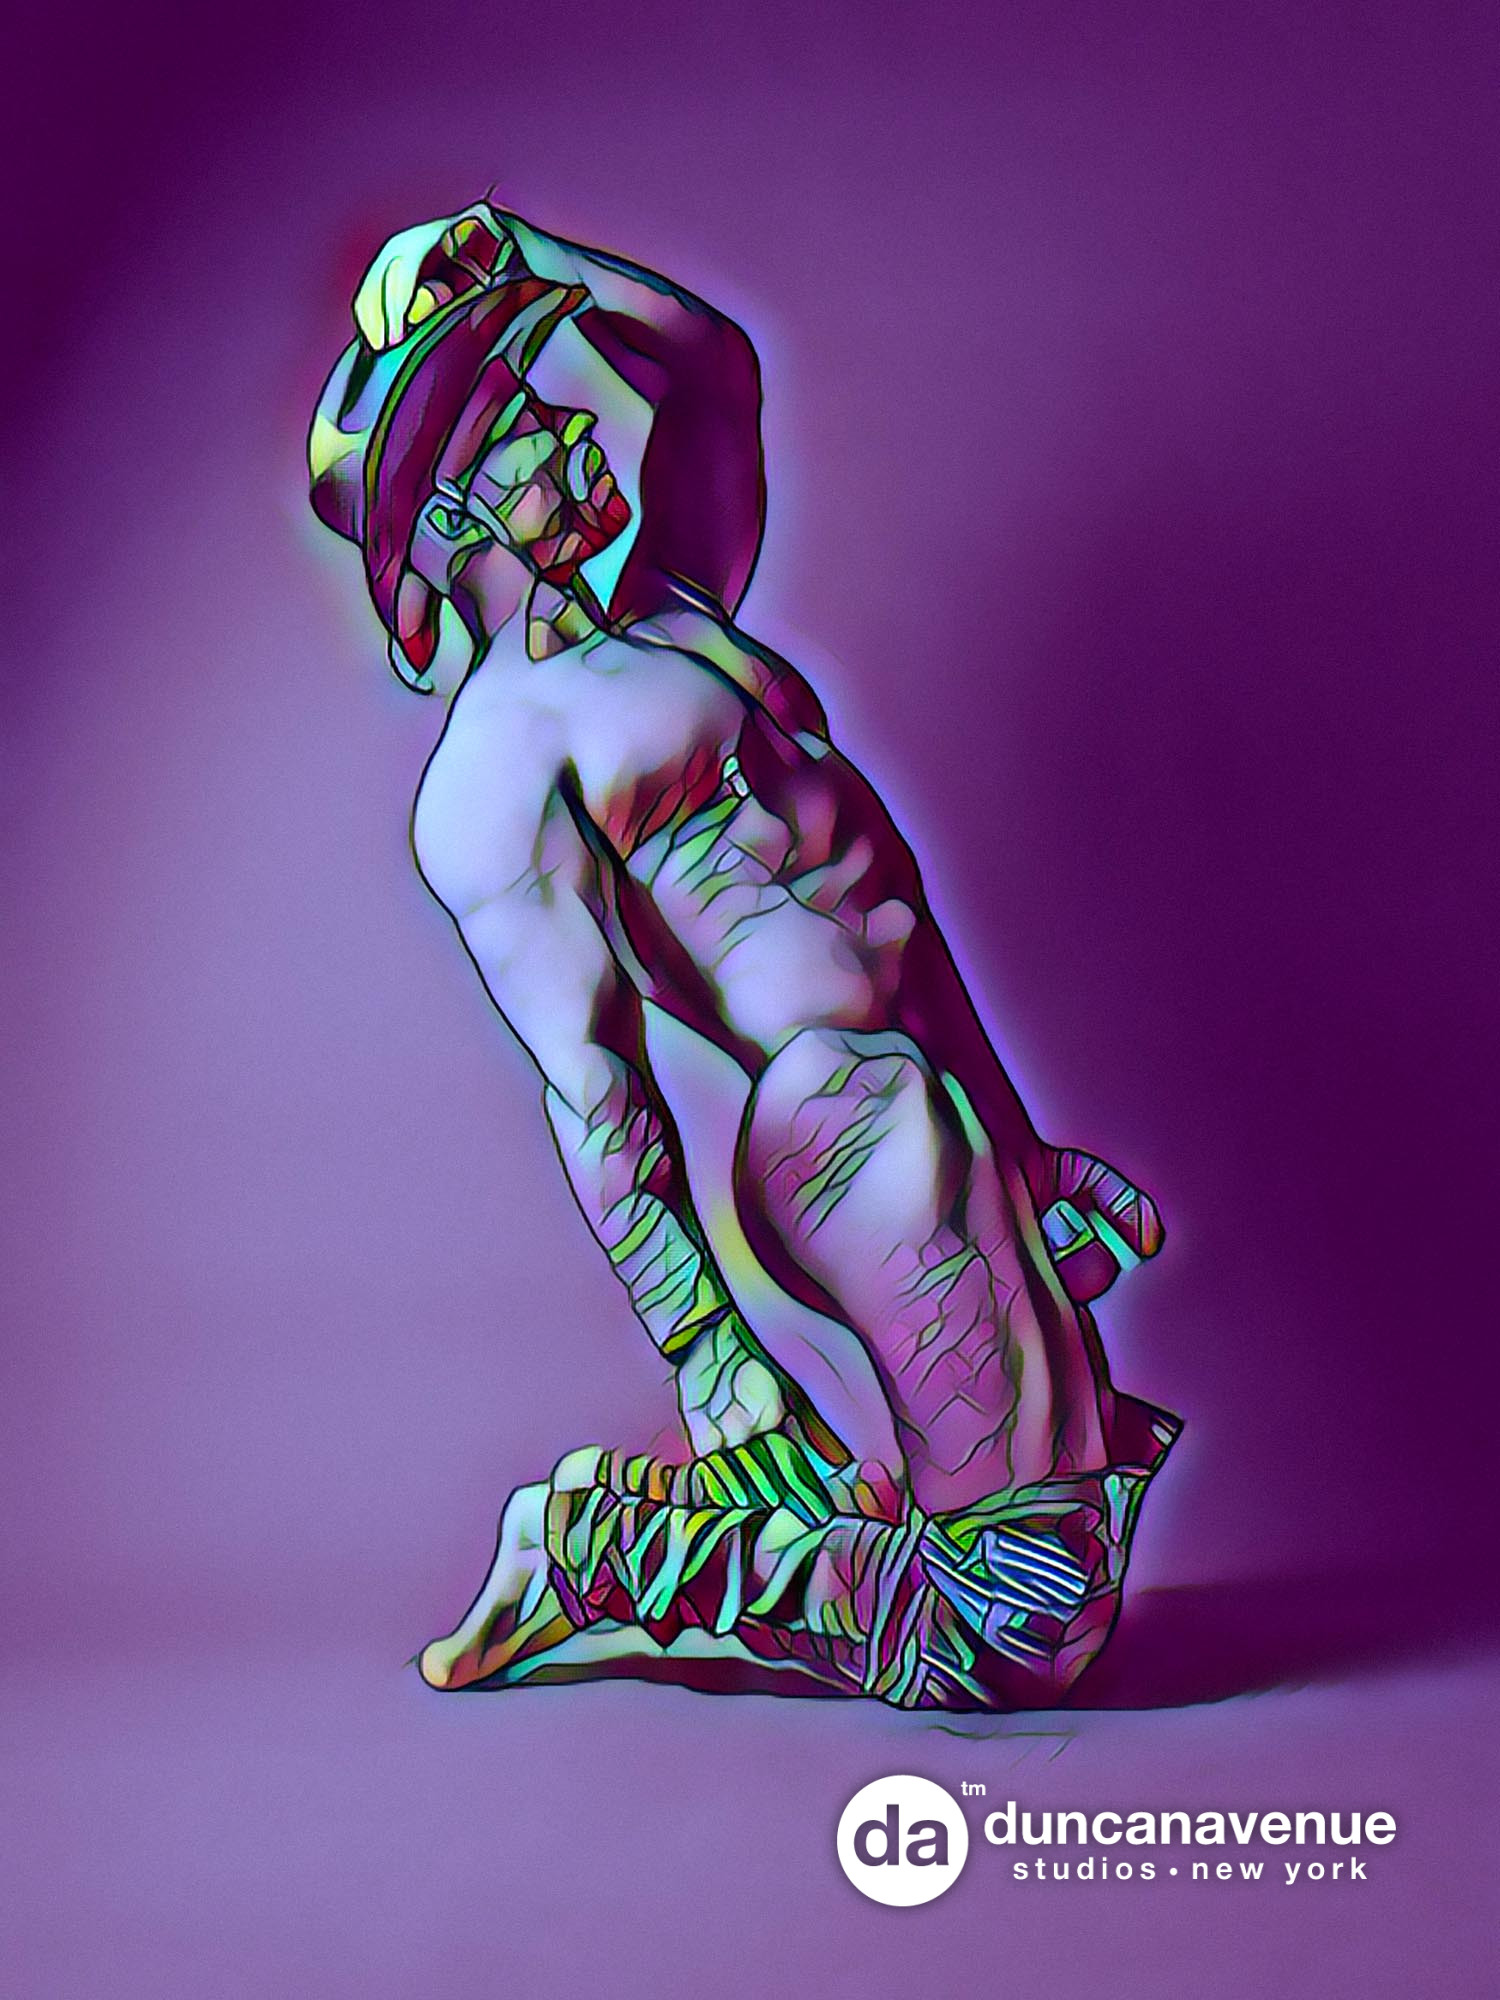 Discovering the Best Homoerotic Art for Sale: A Look at Maxwell Alexander's Vibrant AI-Collaborated Phallus Art